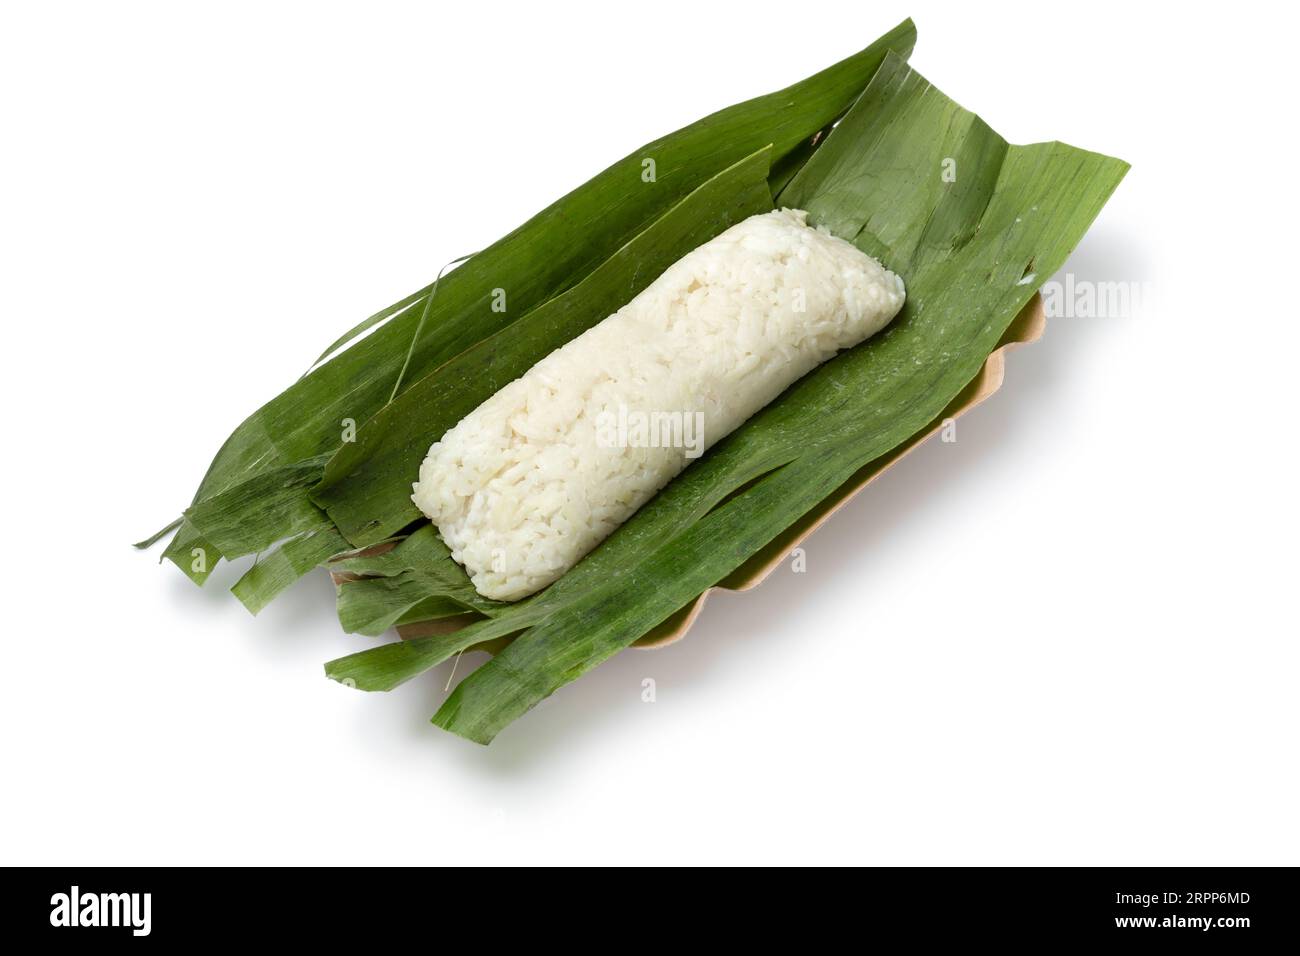 Whole Lemper Ayam wrapped in banana leaves, an Indonesian savoury snack made of glutinous rice filled with seasoned shredded chicken close up isolated Stock Photo